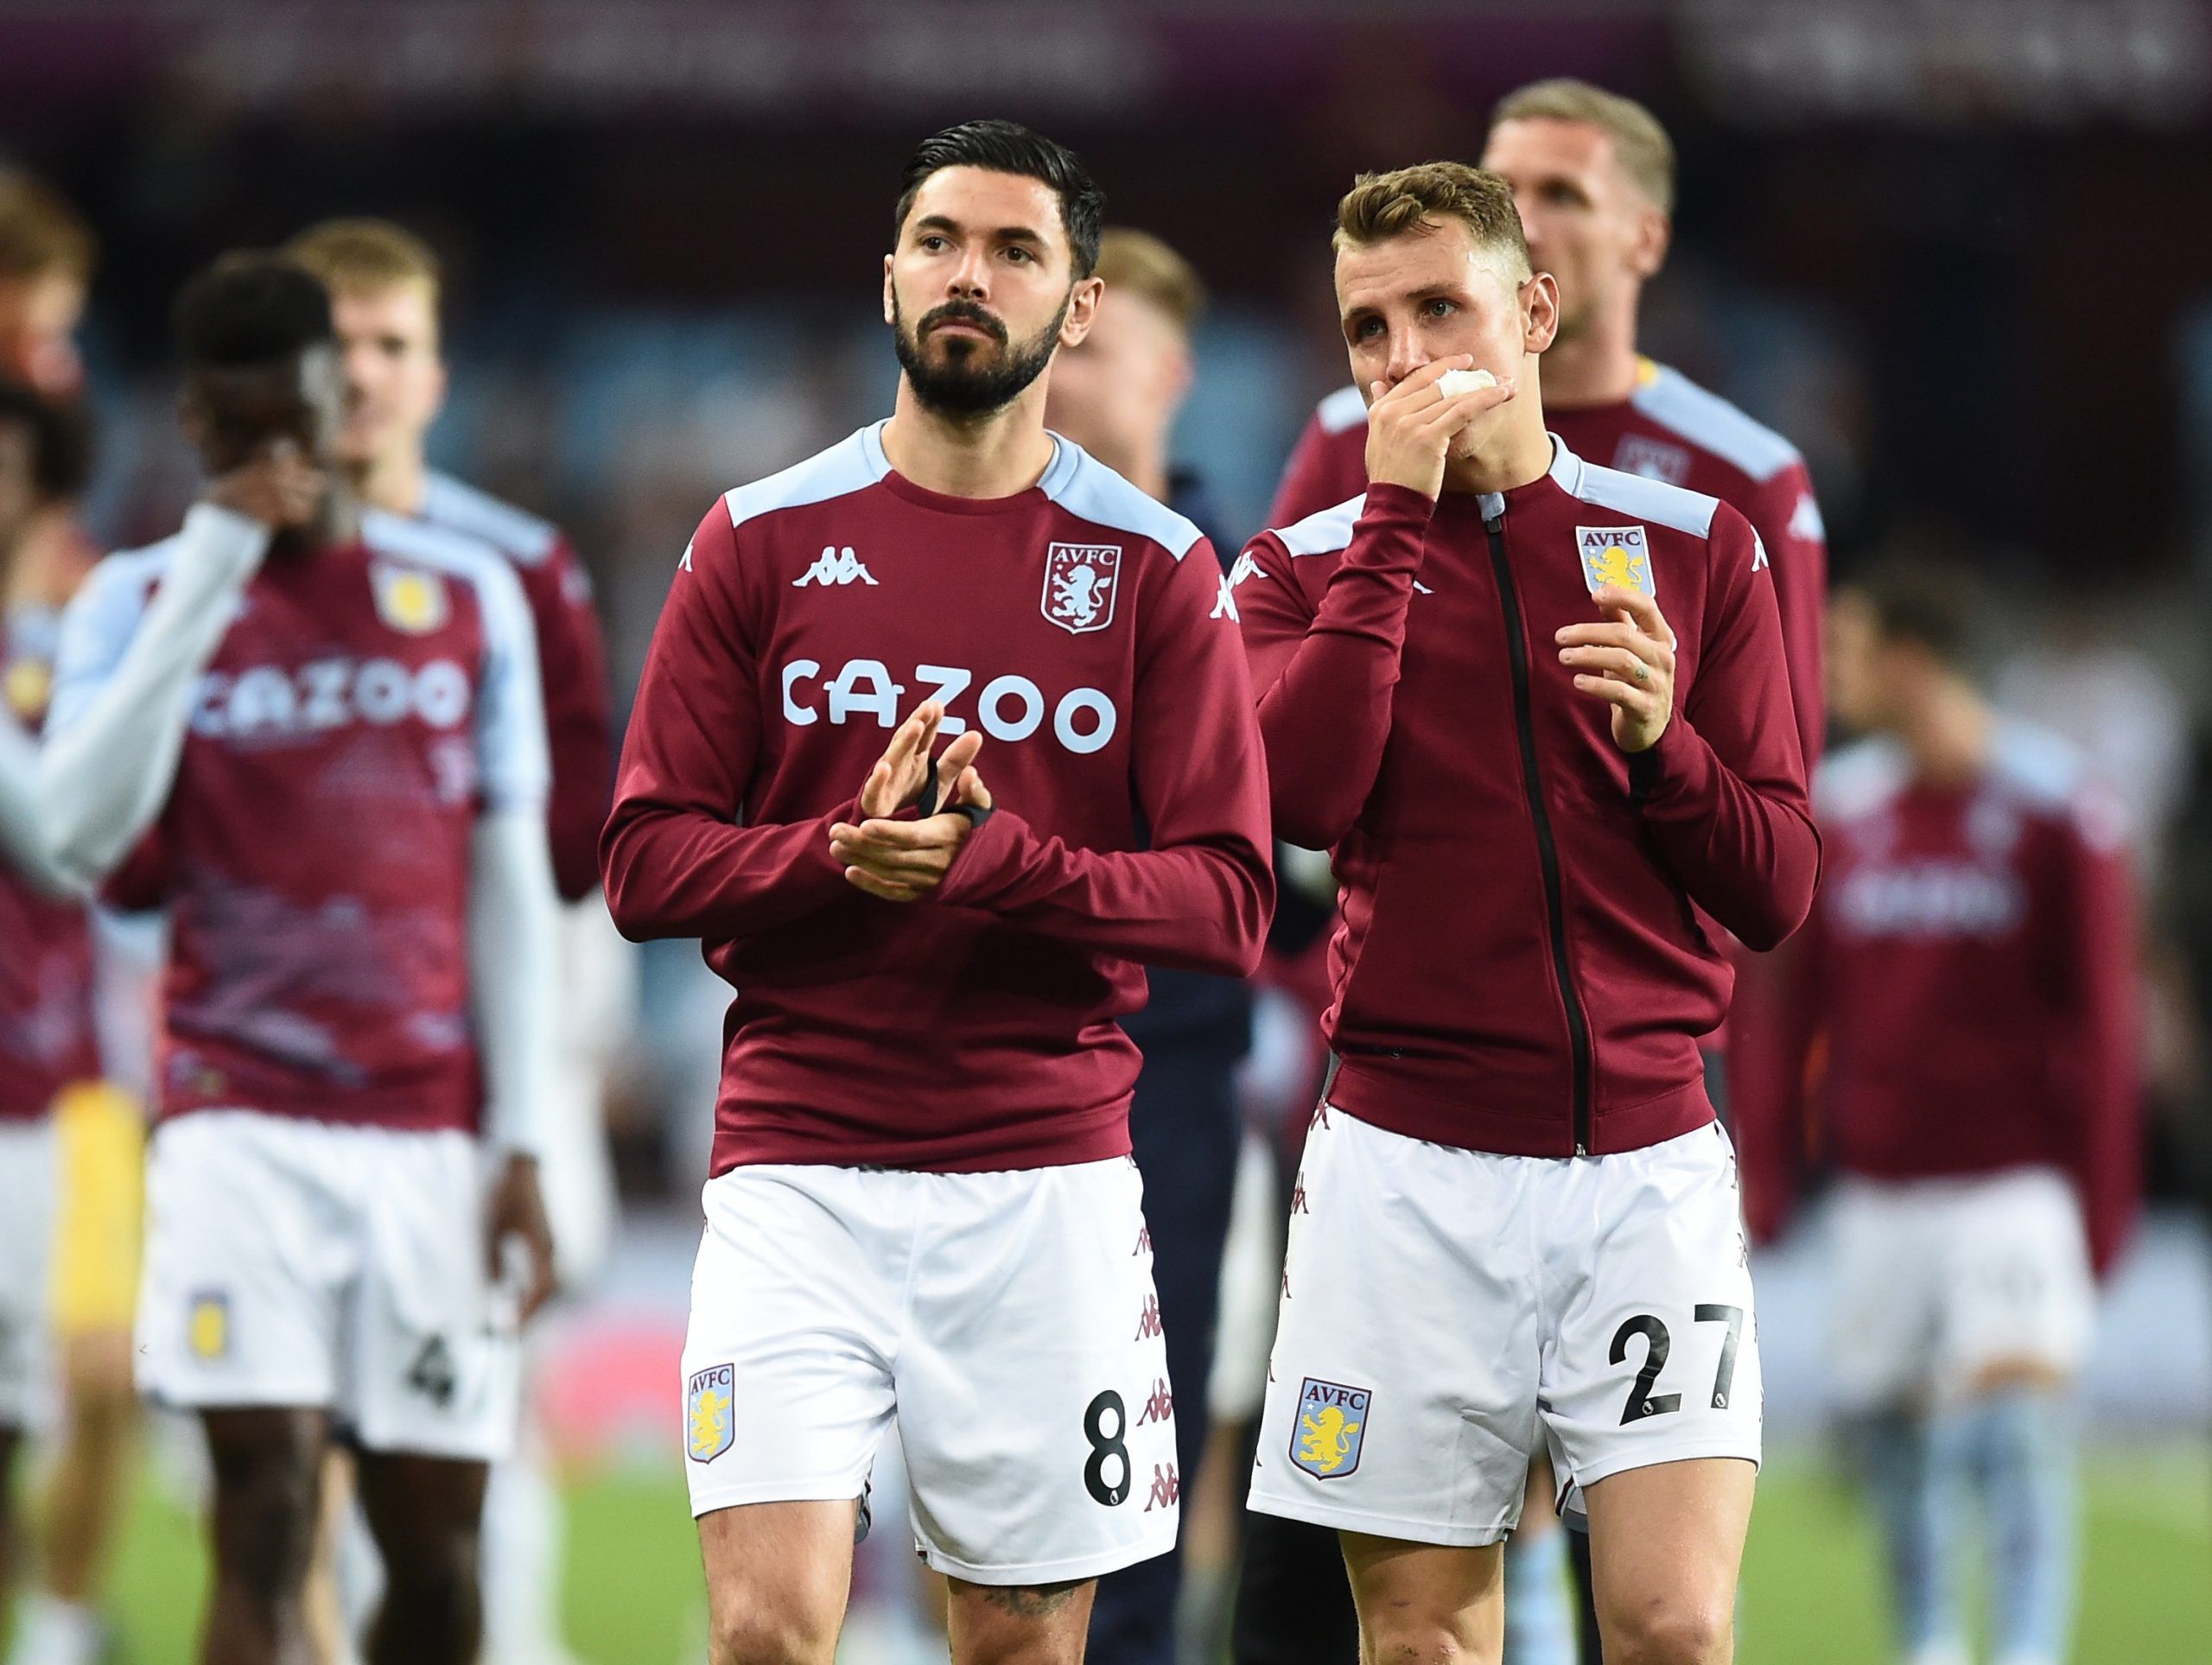 Soccer Football - Premier League - Aston Villa v Burnley - Villa Park, Birmingham, Britain - May 19, 2022 Aston Villa's Morgan Sanson with Lucas Digne after the match Action Images via Reuters/Peter Powell EDITORIAL USE ONLY. No use with unauthorized audio, video, data, fixture lists, club/league logos or 'live' services. Online in-match use limited to 75 images, no video emulation. No use in betting, games or single club /league/player publications.  Please contact your account representative f